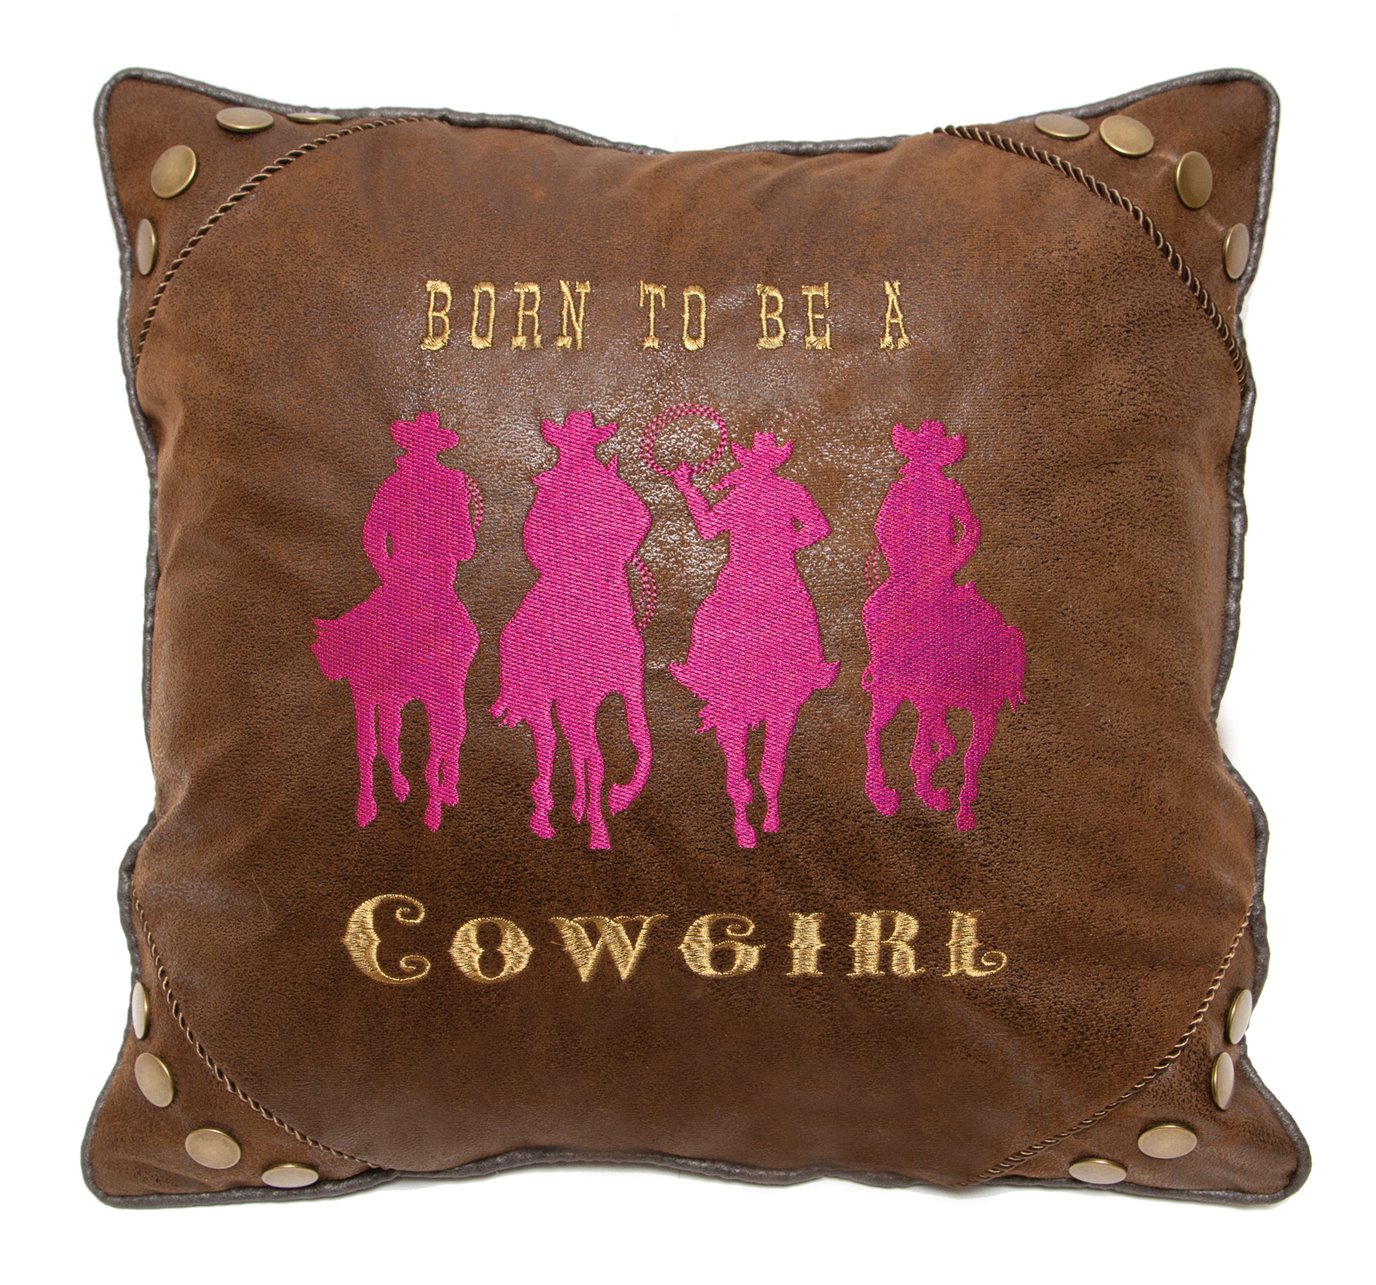 Born to Be a Cowgirl Pillow 18"x18"